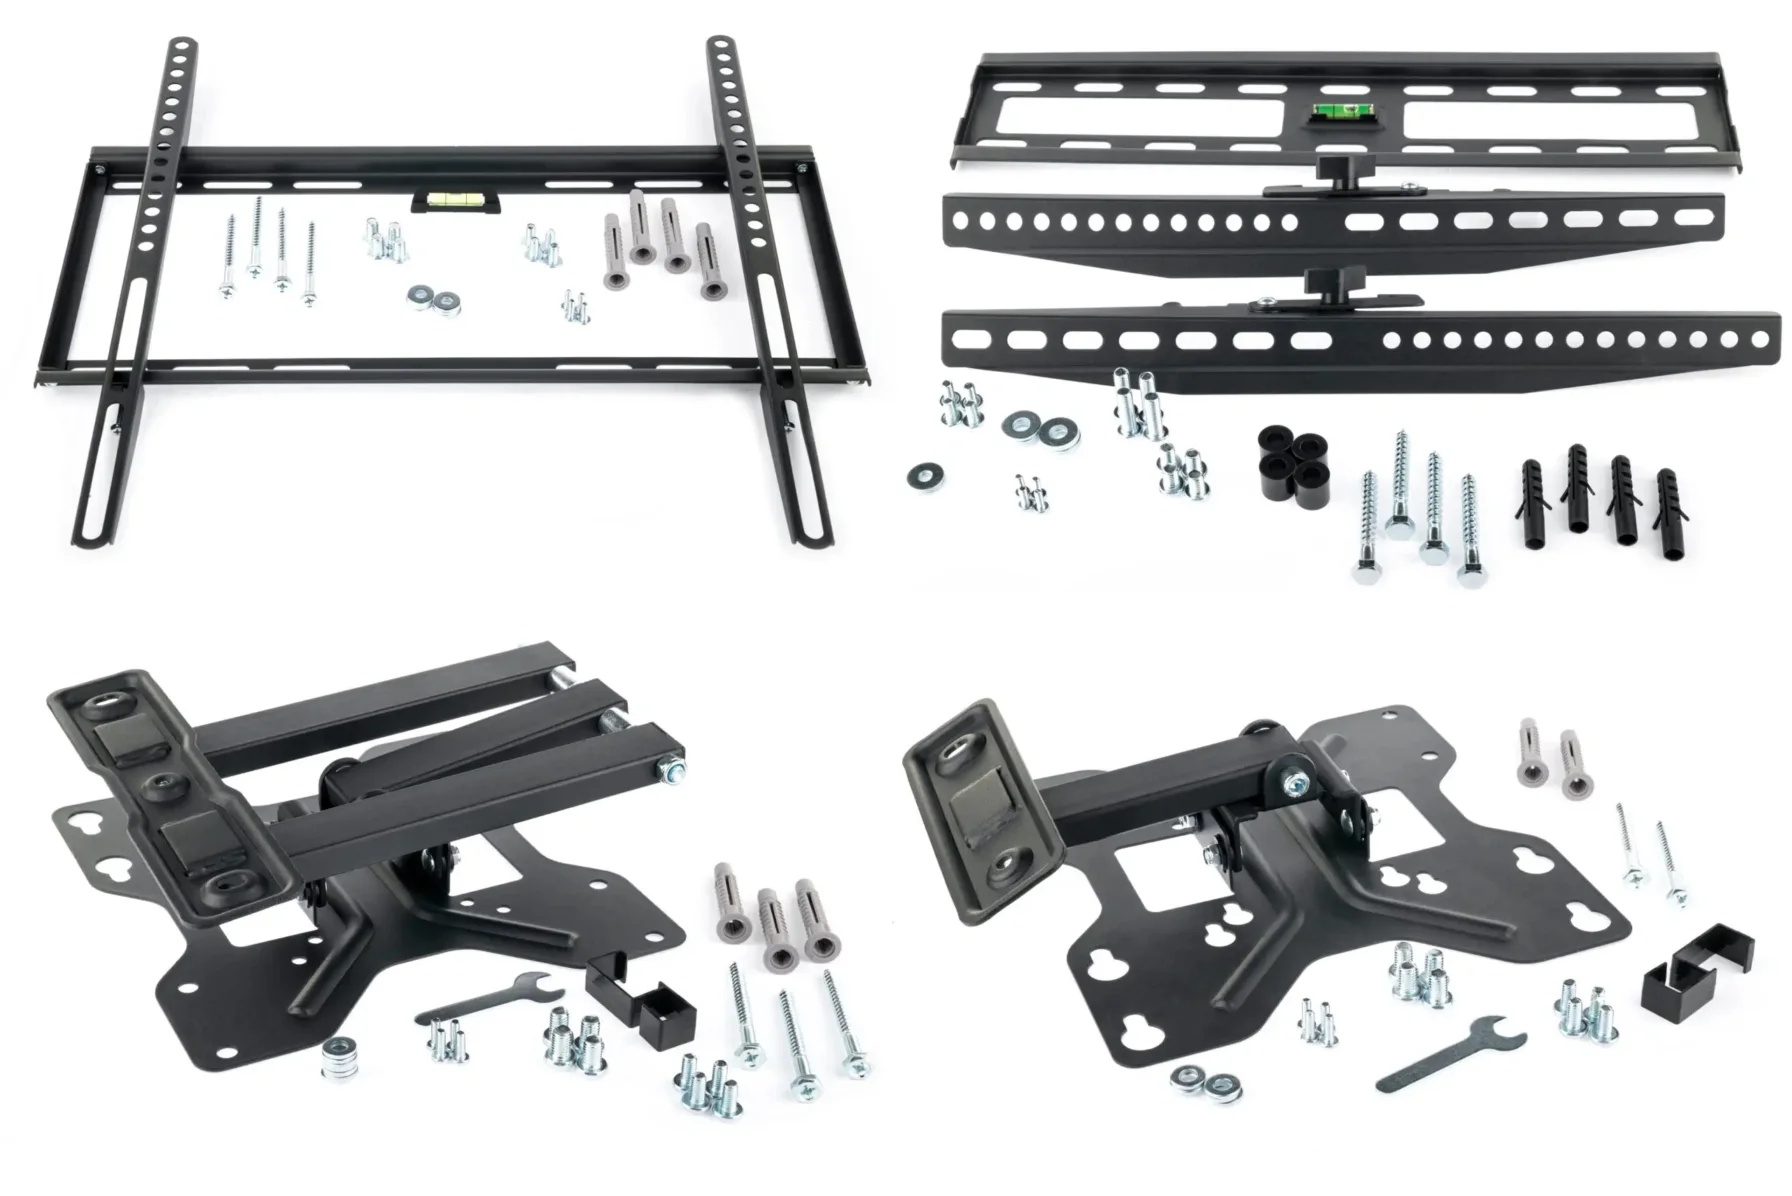 A TV mounting kits with various components laid out on a white surface. The components include black metal brackets, silver screws and bolts, plastic anchors, and cable ties.